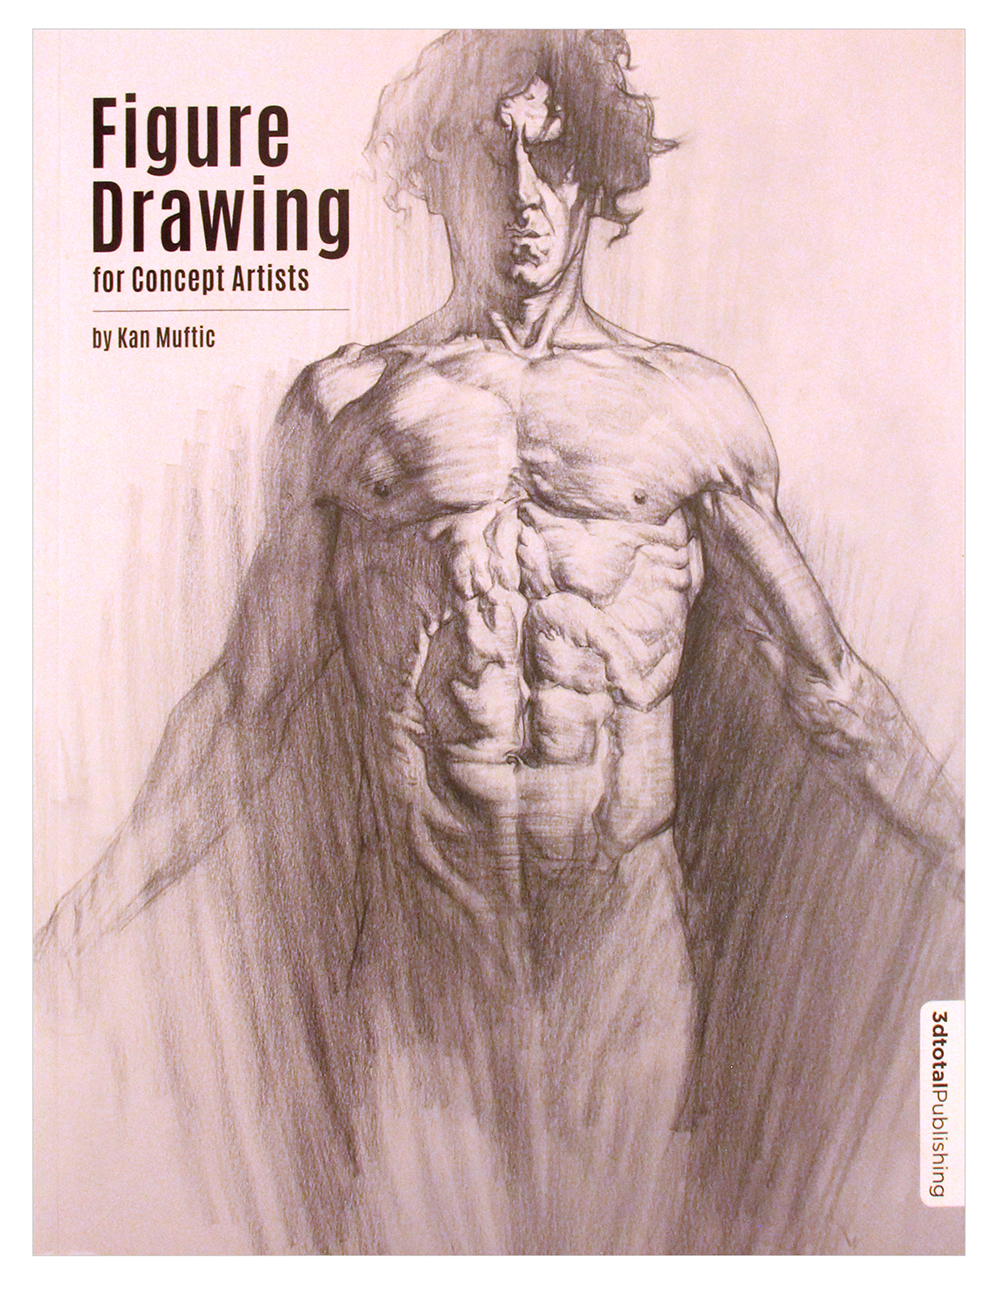 Figure Drawing for Concept Artists, Kan Muftic